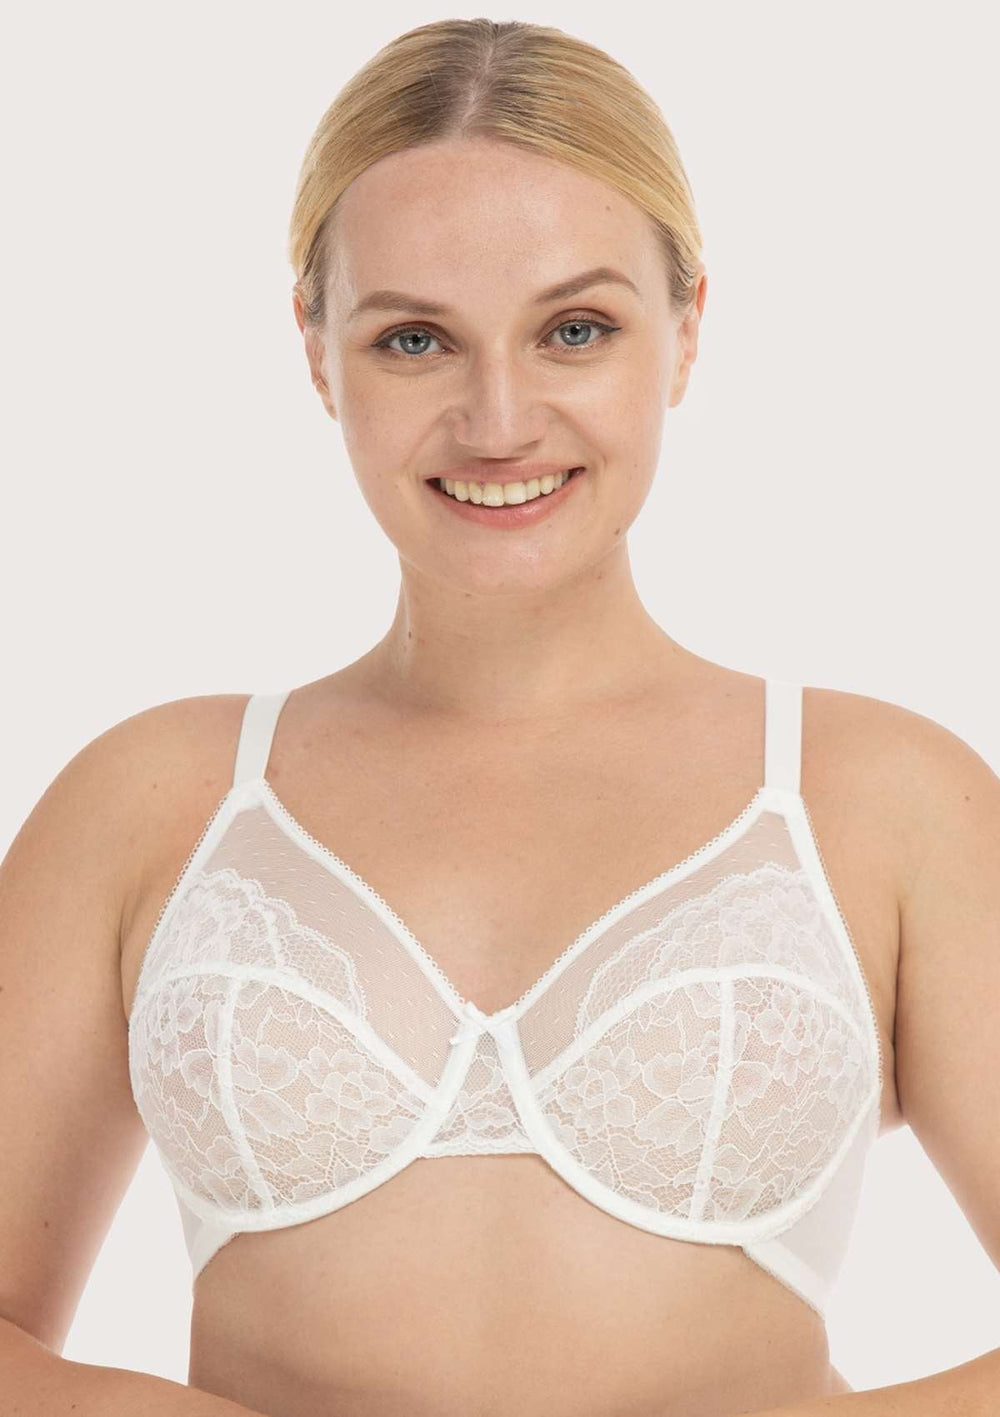 vet-ixioh Plus Size Womens 2PC Comfy Straps Daily Wear Bras Push Up  Bralette Full Coverage Bra Floral Lace T-Shirt Bra Beige at  Women's  Clothing store